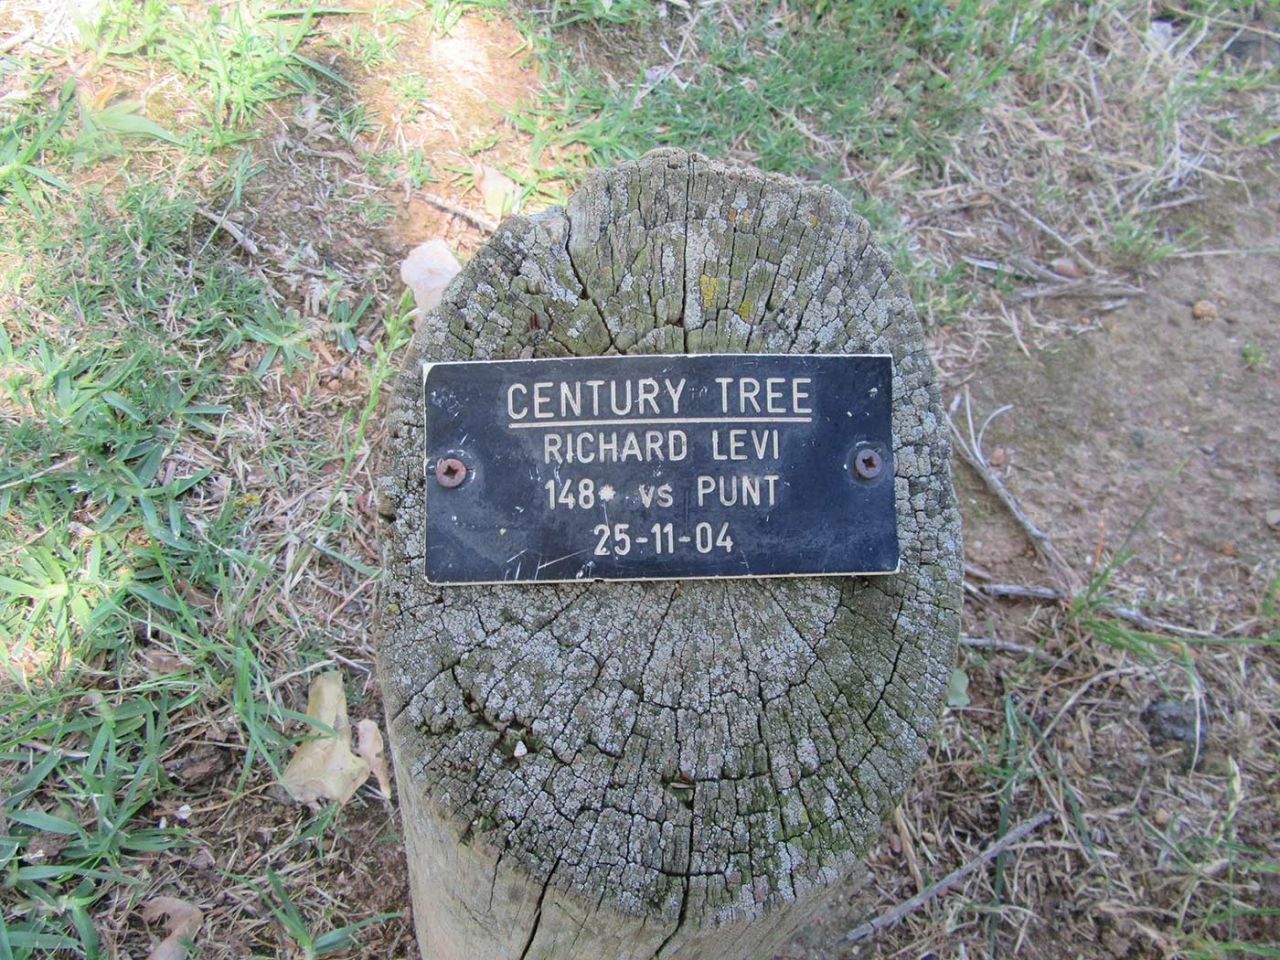 A plaque on a tree stump beside the tree planted to mark a hundred scored by Richard Levi in 2004, February 2018